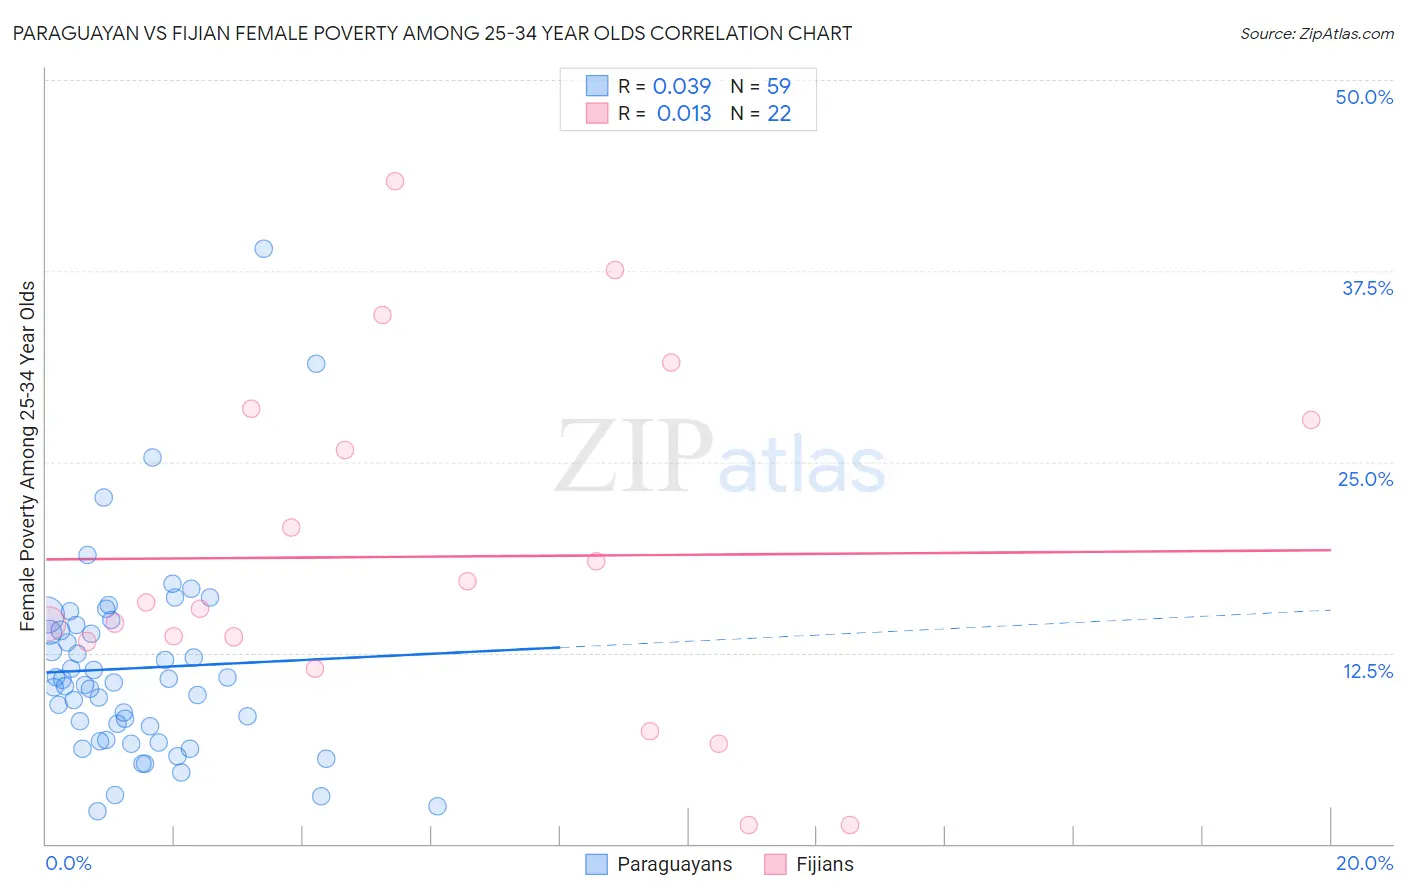 Paraguayan vs Fijian Female Poverty Among 25-34 Year Olds